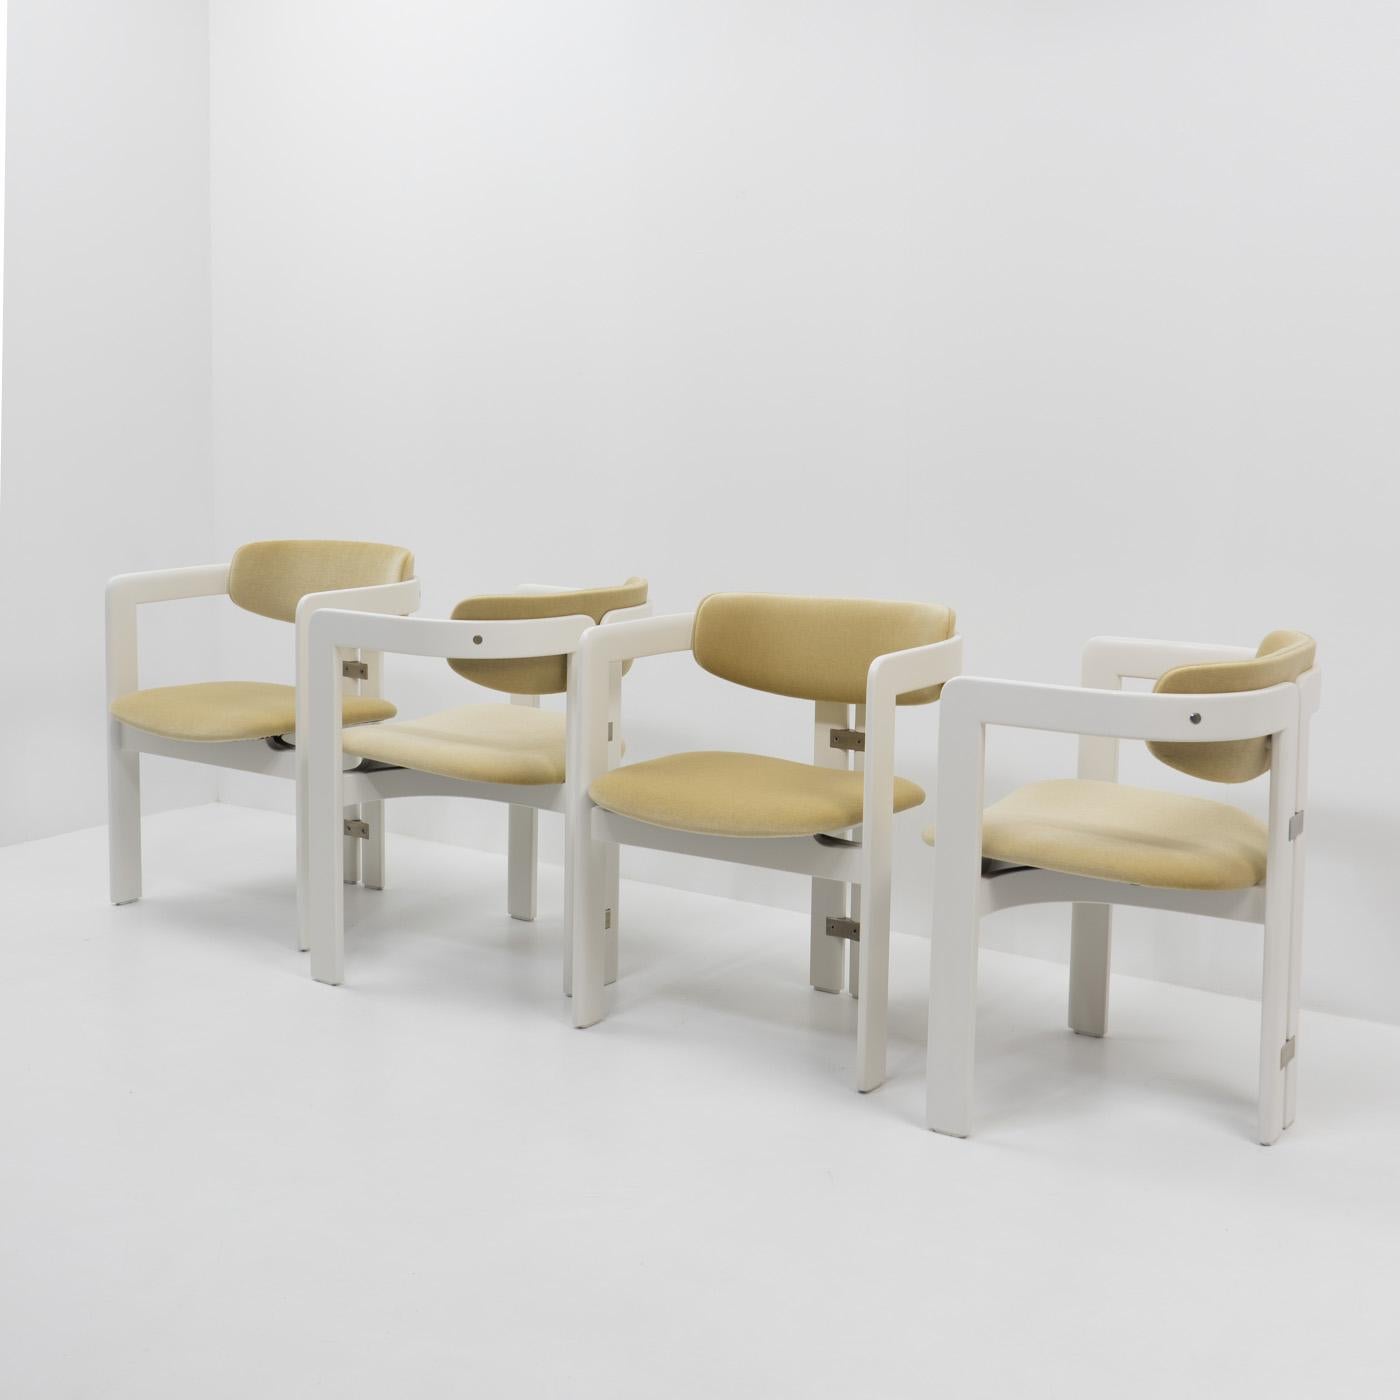 Set of four “Pamplona” dining chairs by Augusto Savini for Pozzi, featuring a white wooden frame with natural mohair upholstery.

The Pamplona chair is a timeless and iconic piece of furniture, designed by the renowed Italian architect and designer,